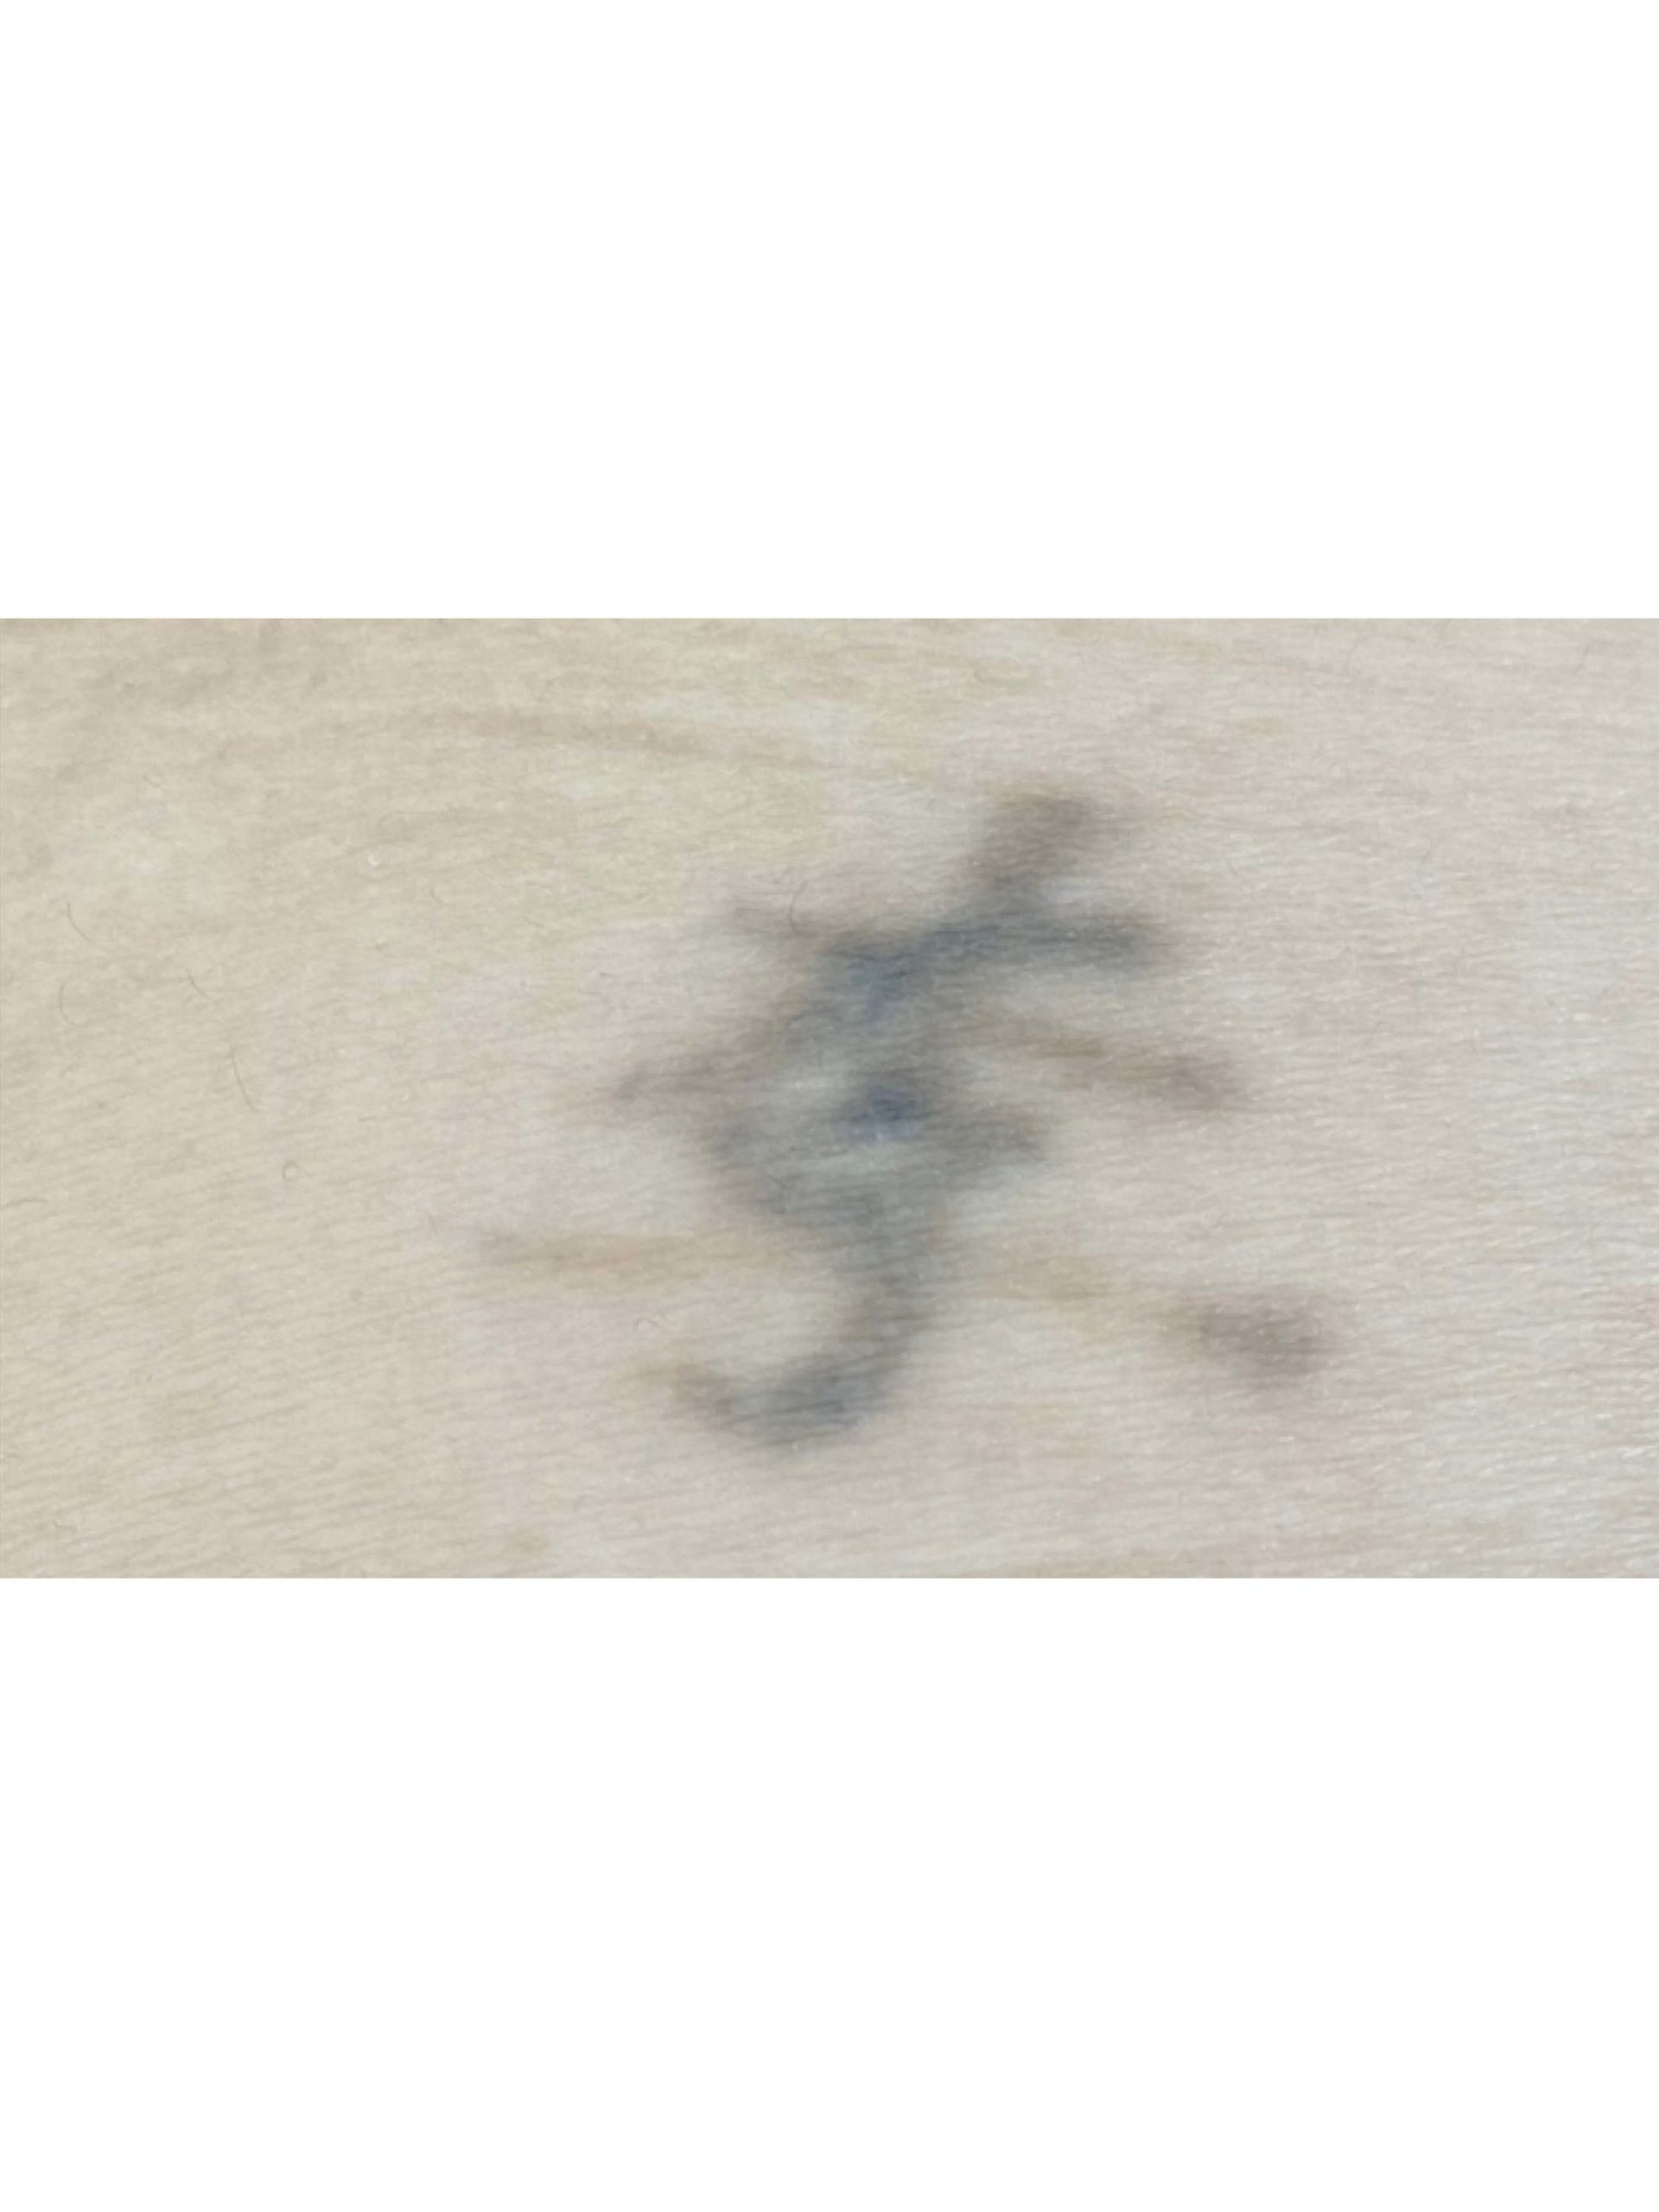 Tattoo Removal Before and After Photos